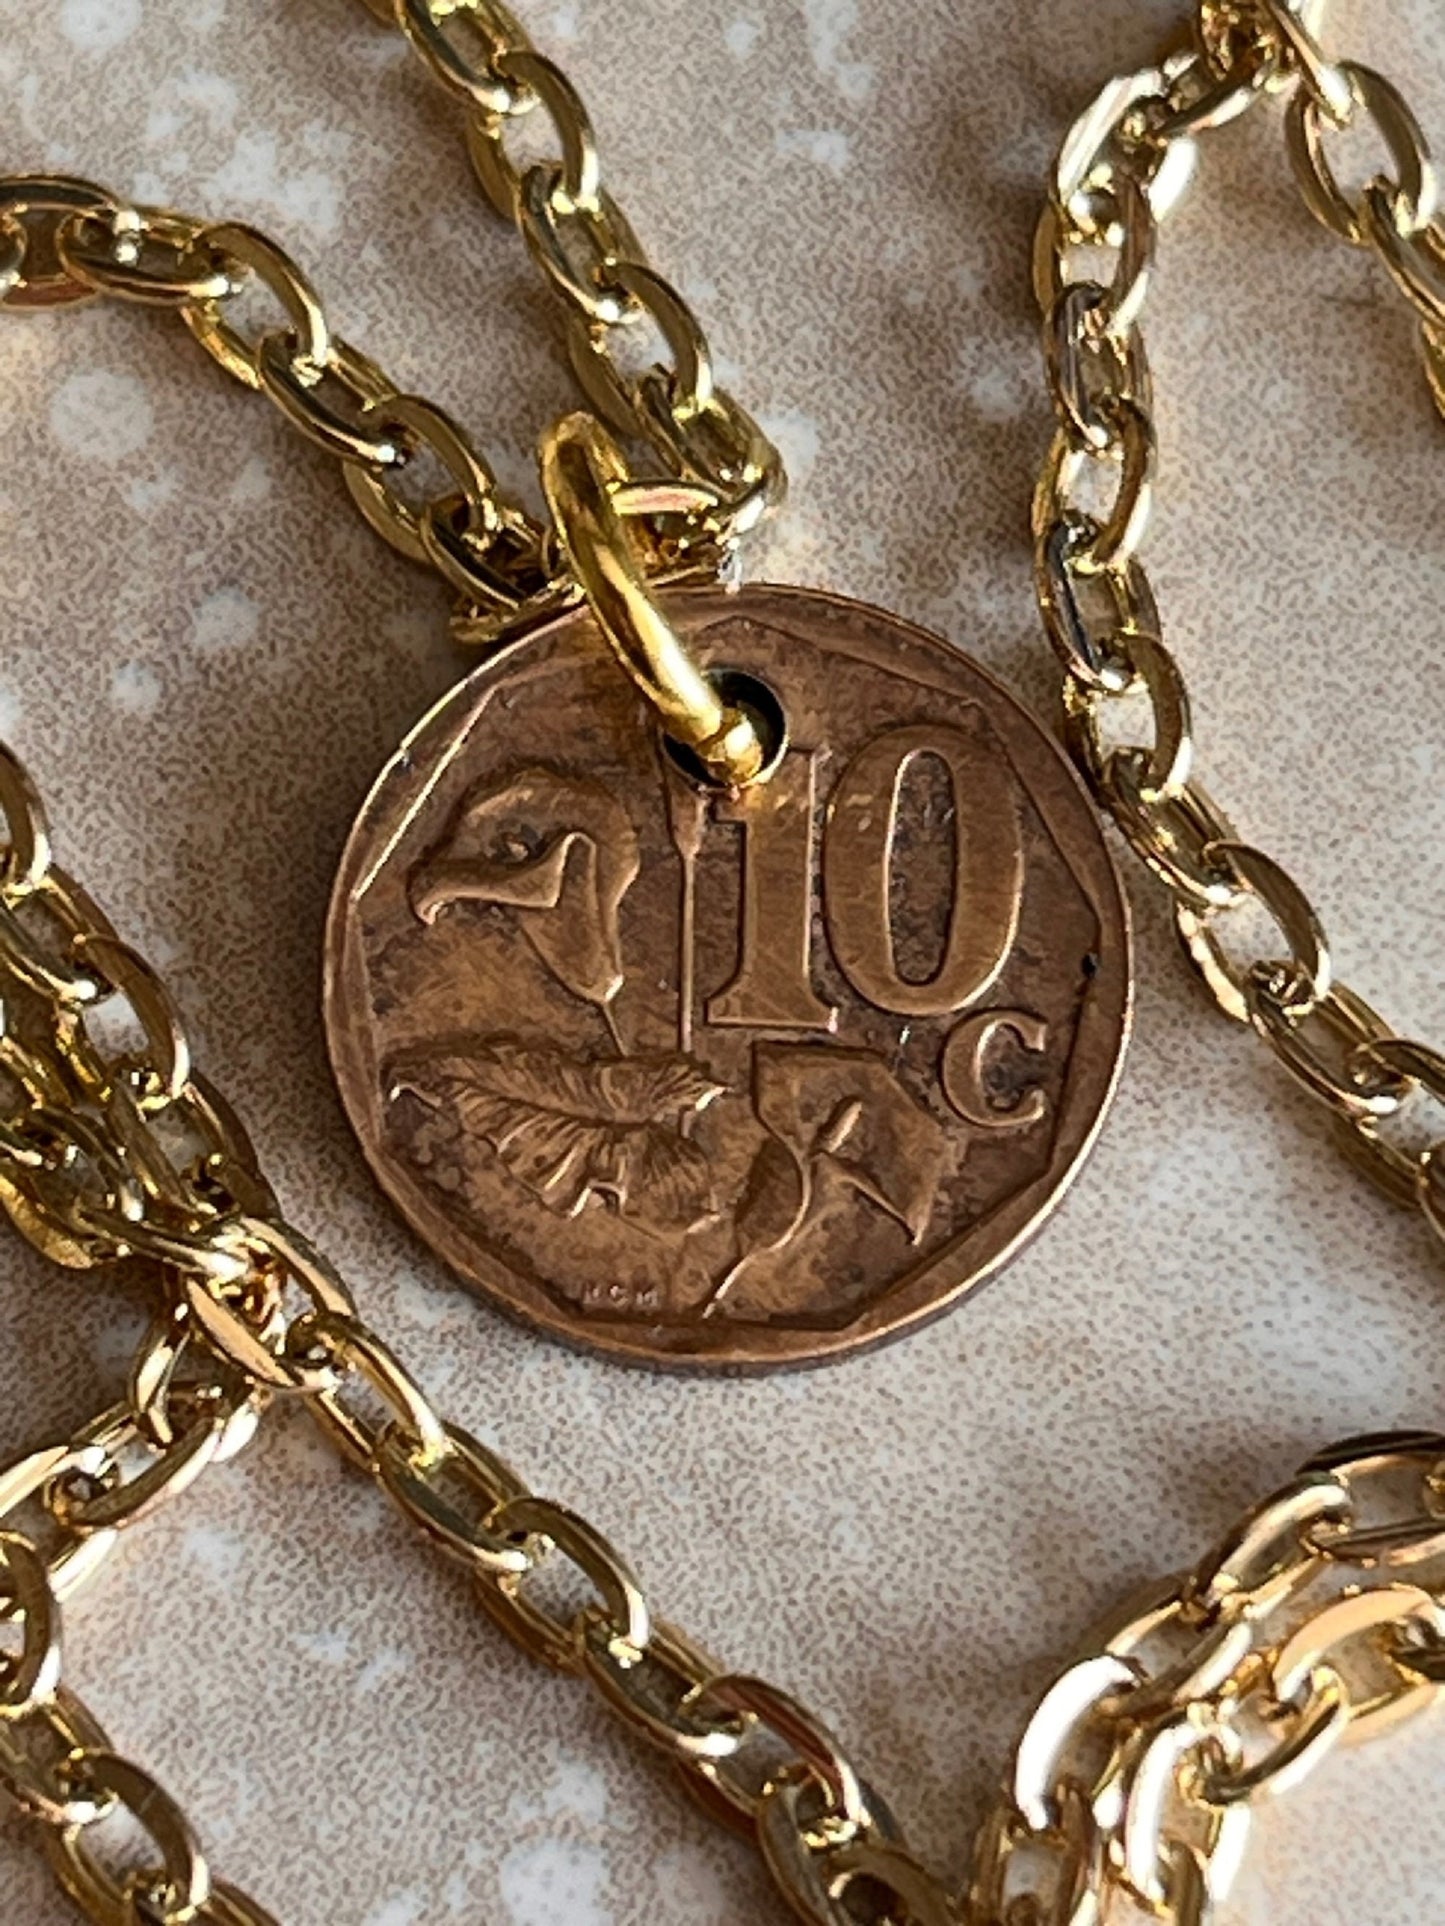 South Africa Coin Pendant African 10 Cents Personal Necklace Old Vintage Handmade Jewelry Gift Friend Charm For Him Her World Coin Collector